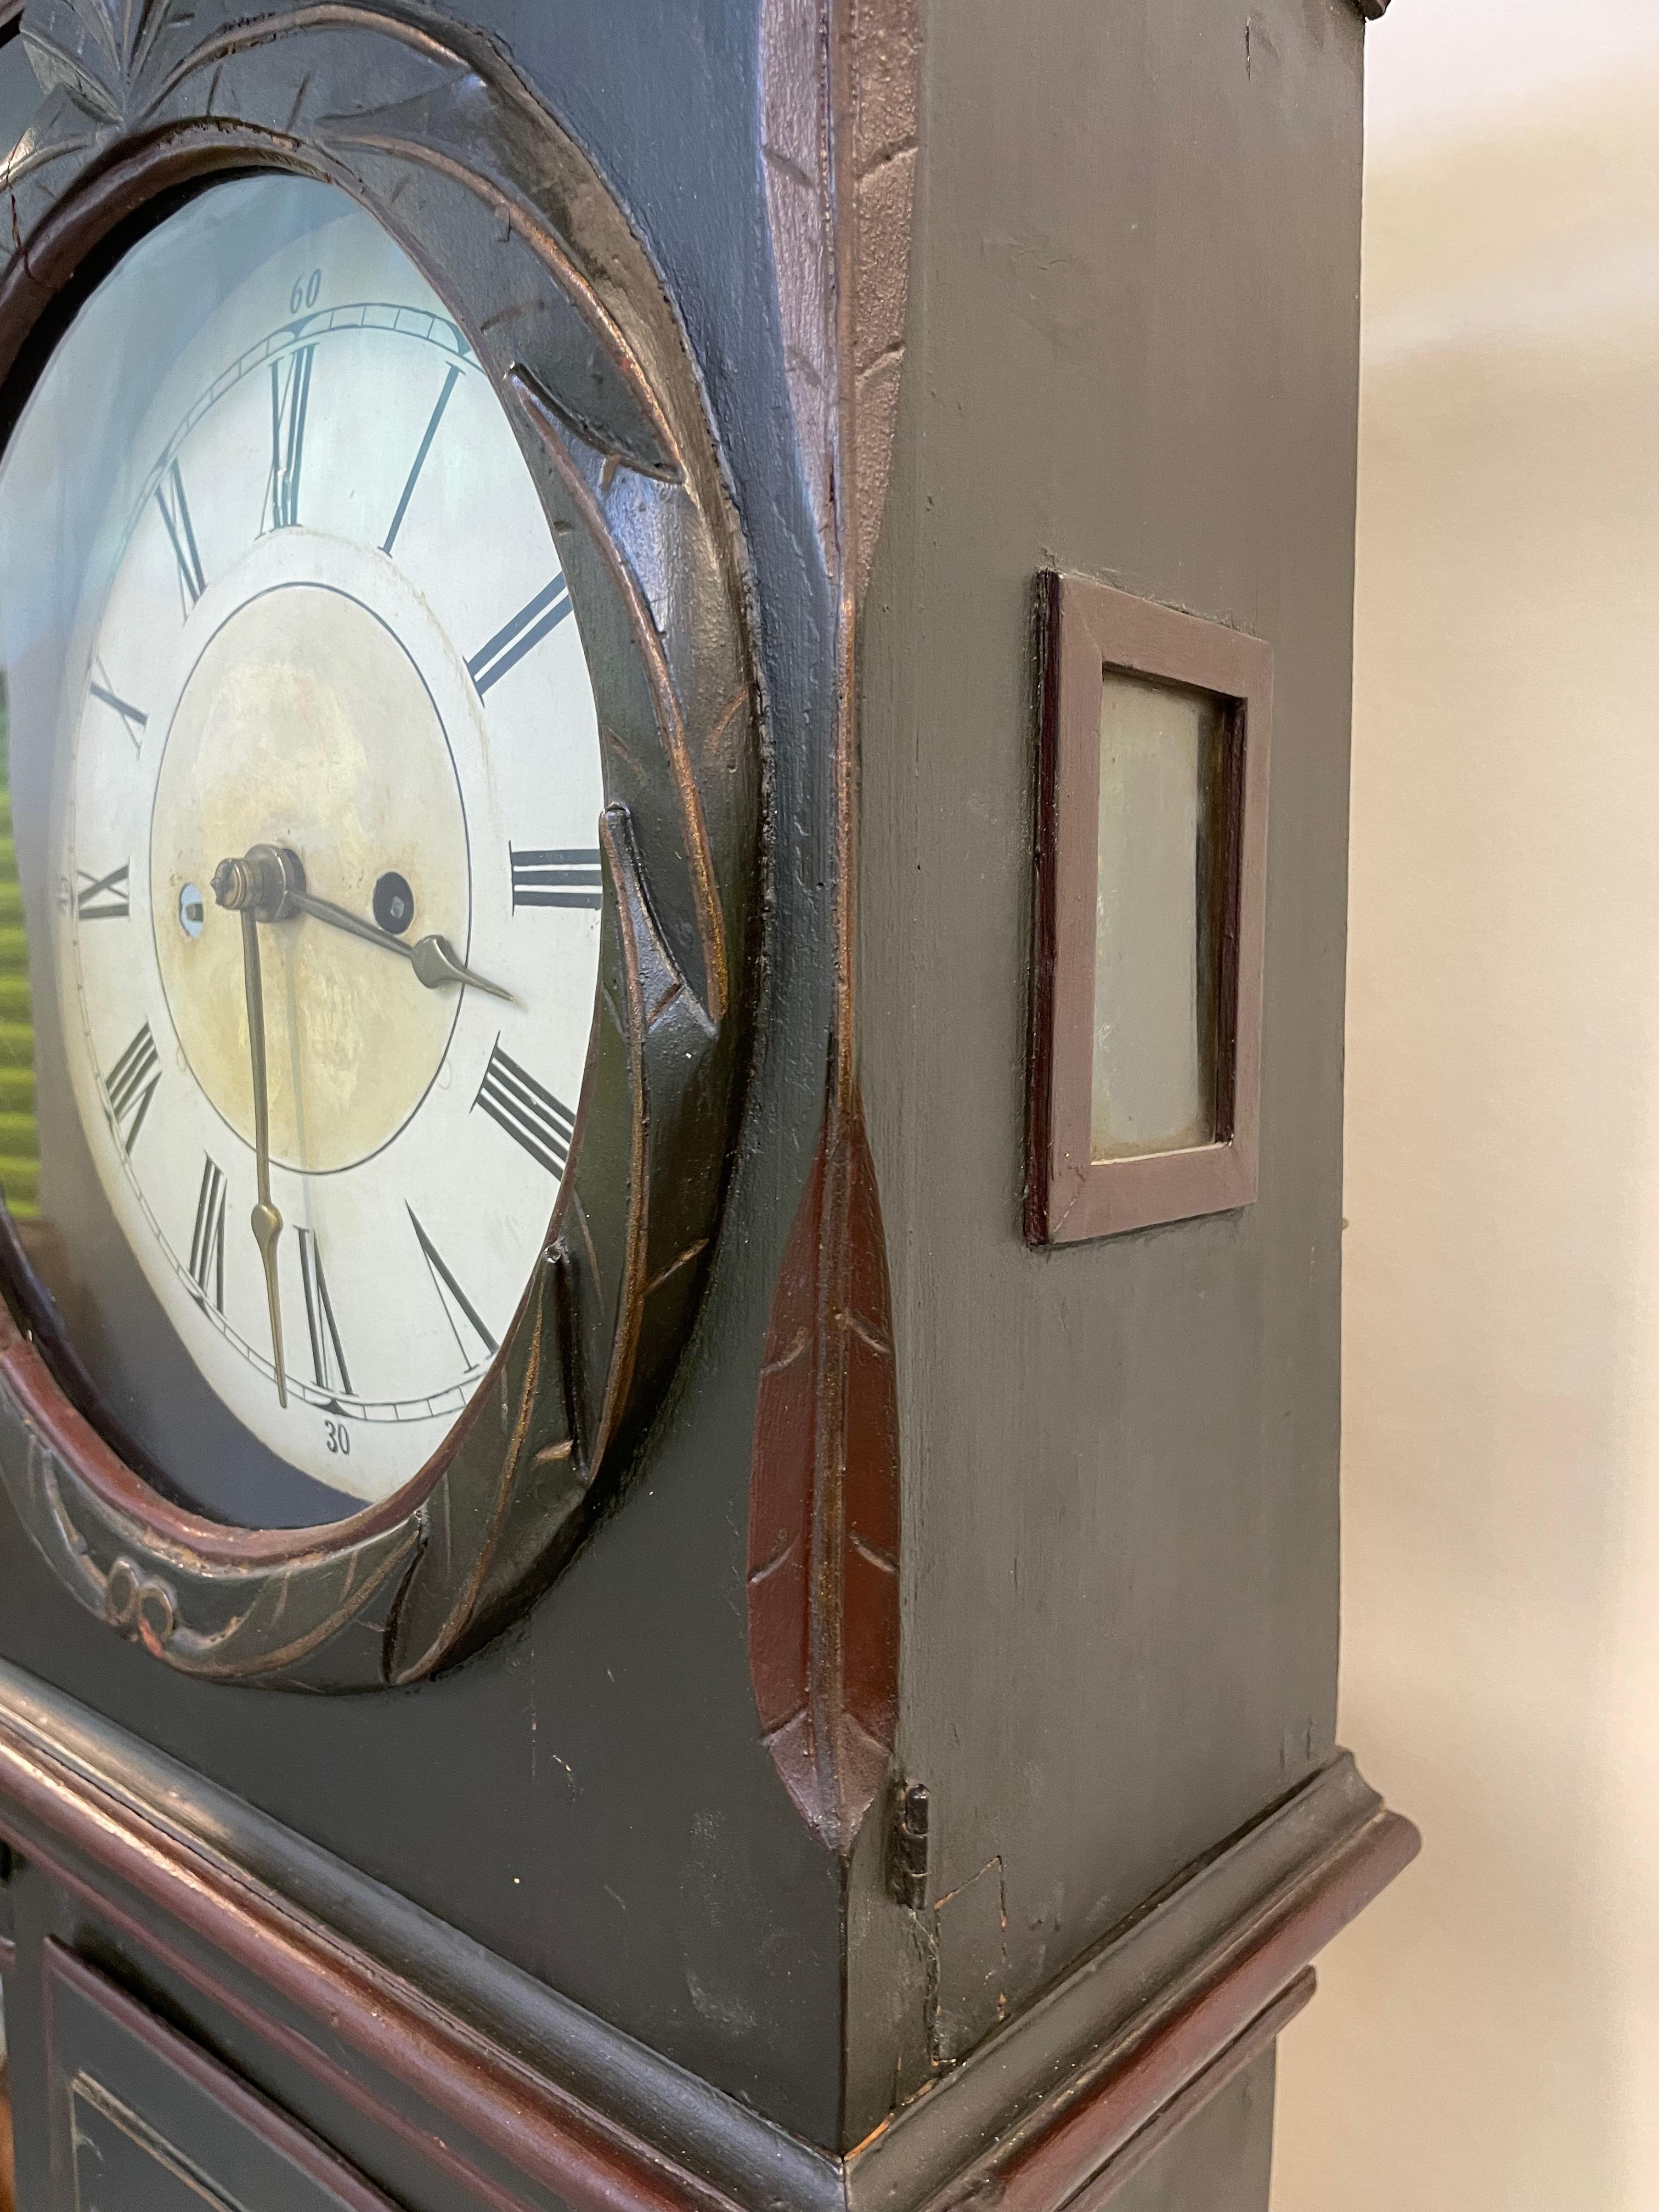 This stately grandfather clock is from the first quarter of the 19th century. It is made in the traditional Scandinavian style of clock making and has charming and whimsical details on the face of the clock as well as filigreed wooden side access